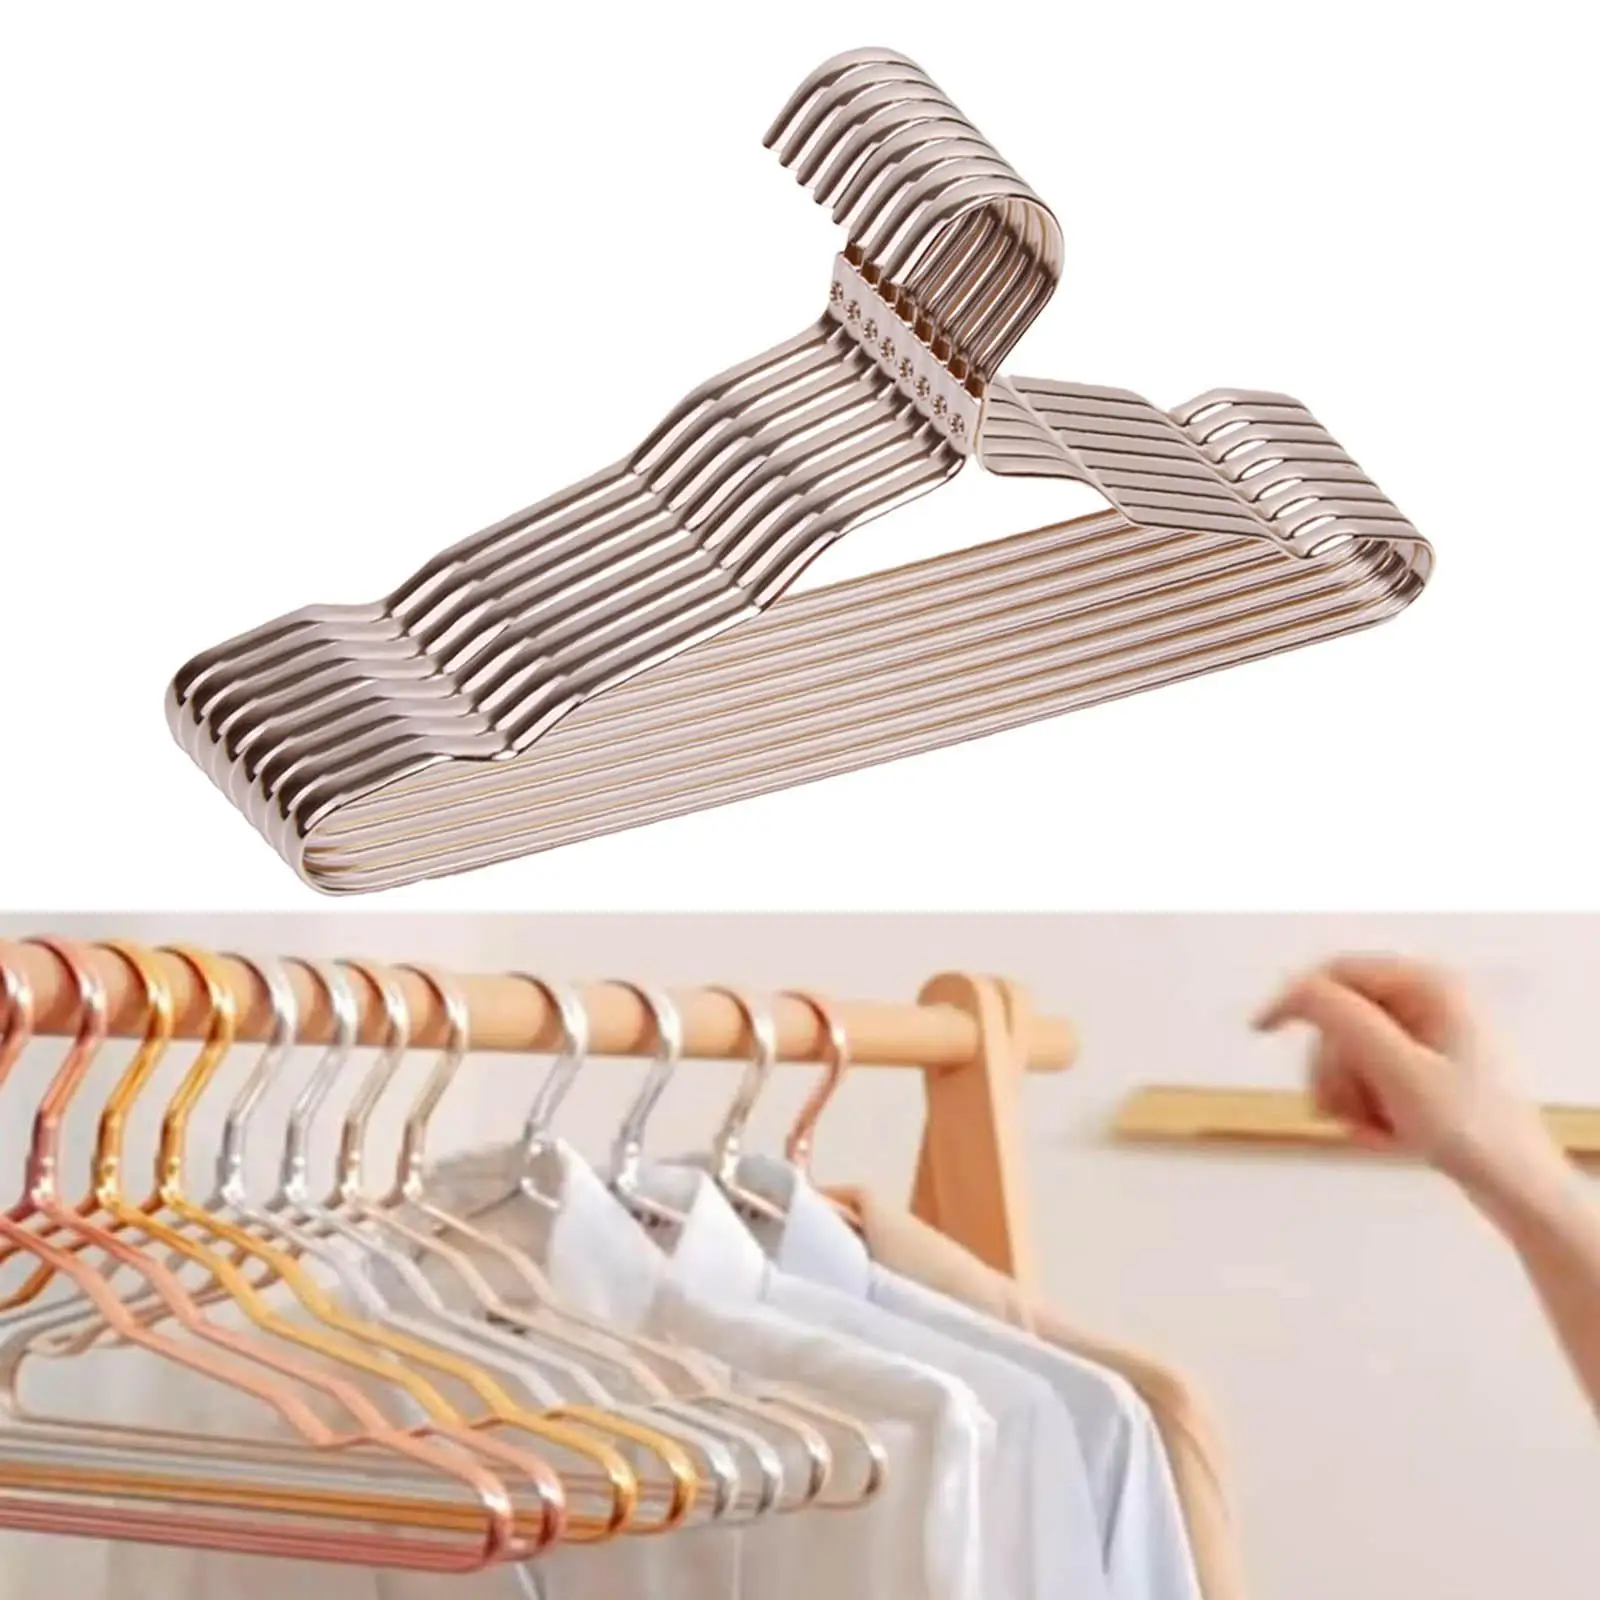 10Pcs Strong Metal Wire Hangers Anti Slip Drying Rack Seamless for Laundry